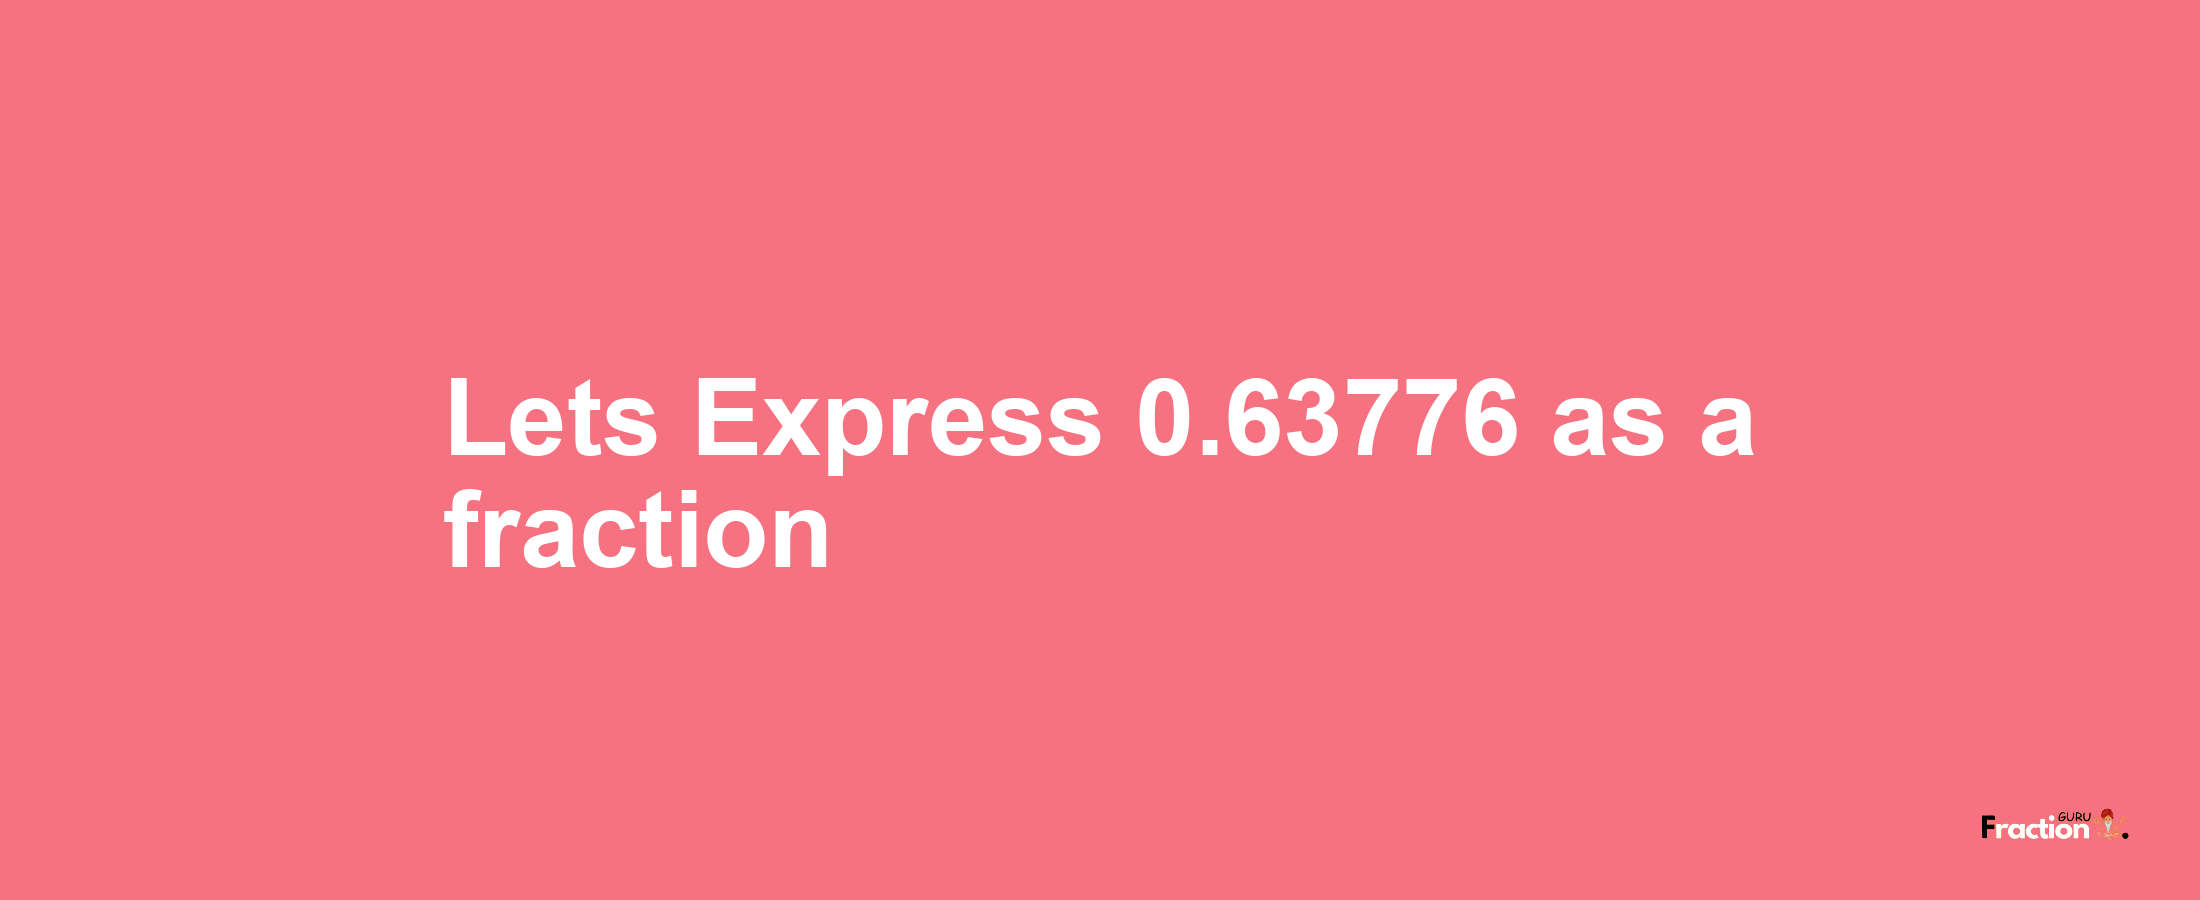 Lets Express 0.63776 as afraction